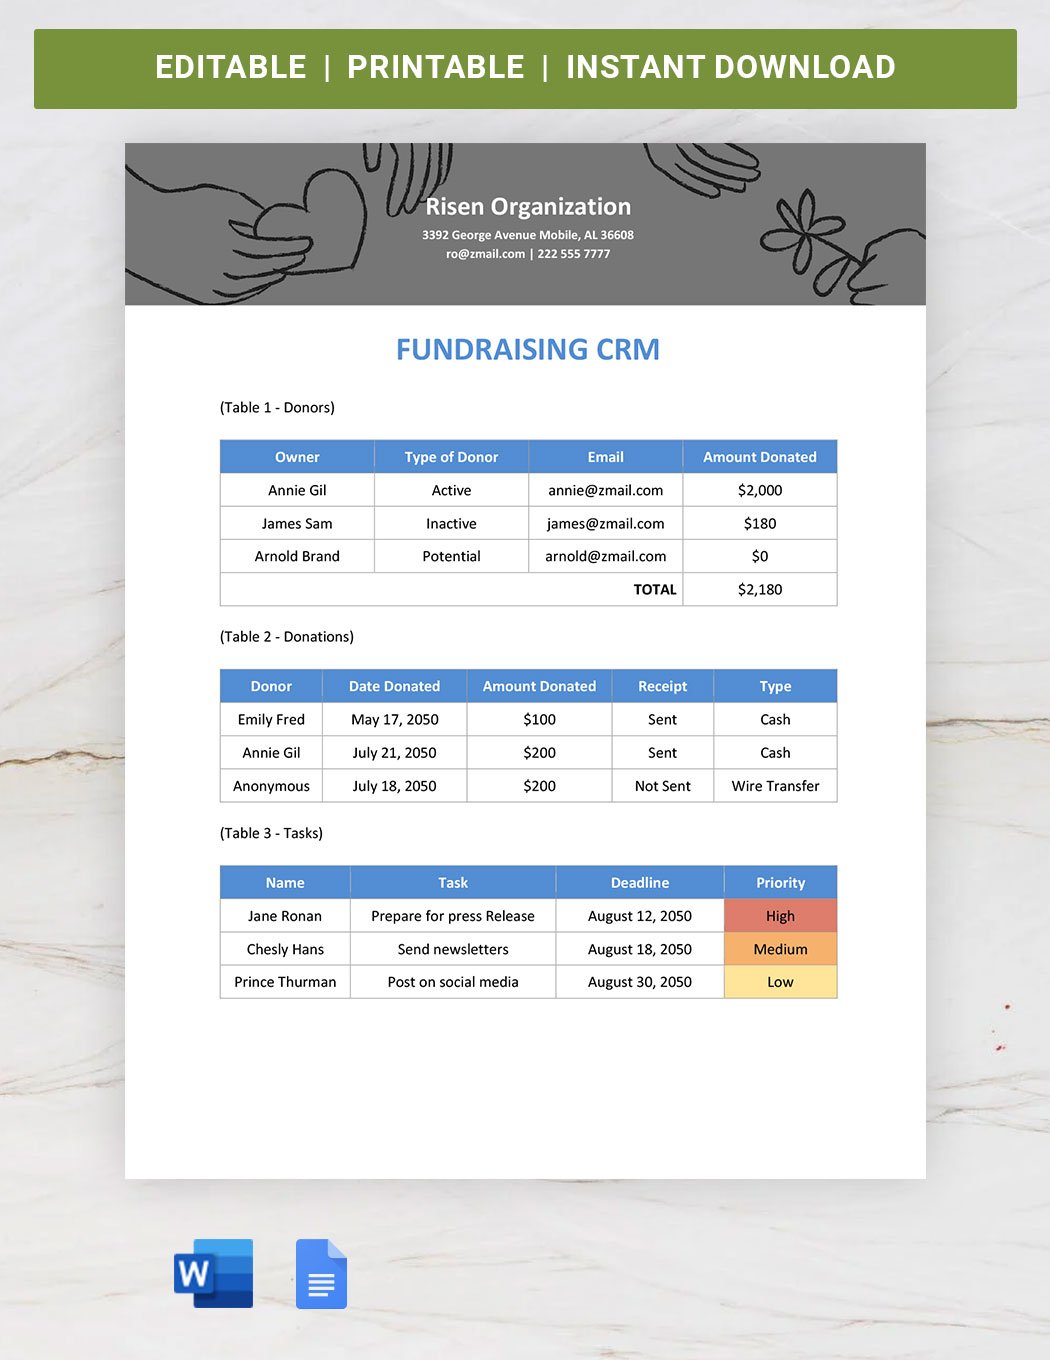 Fundraising CRM Template